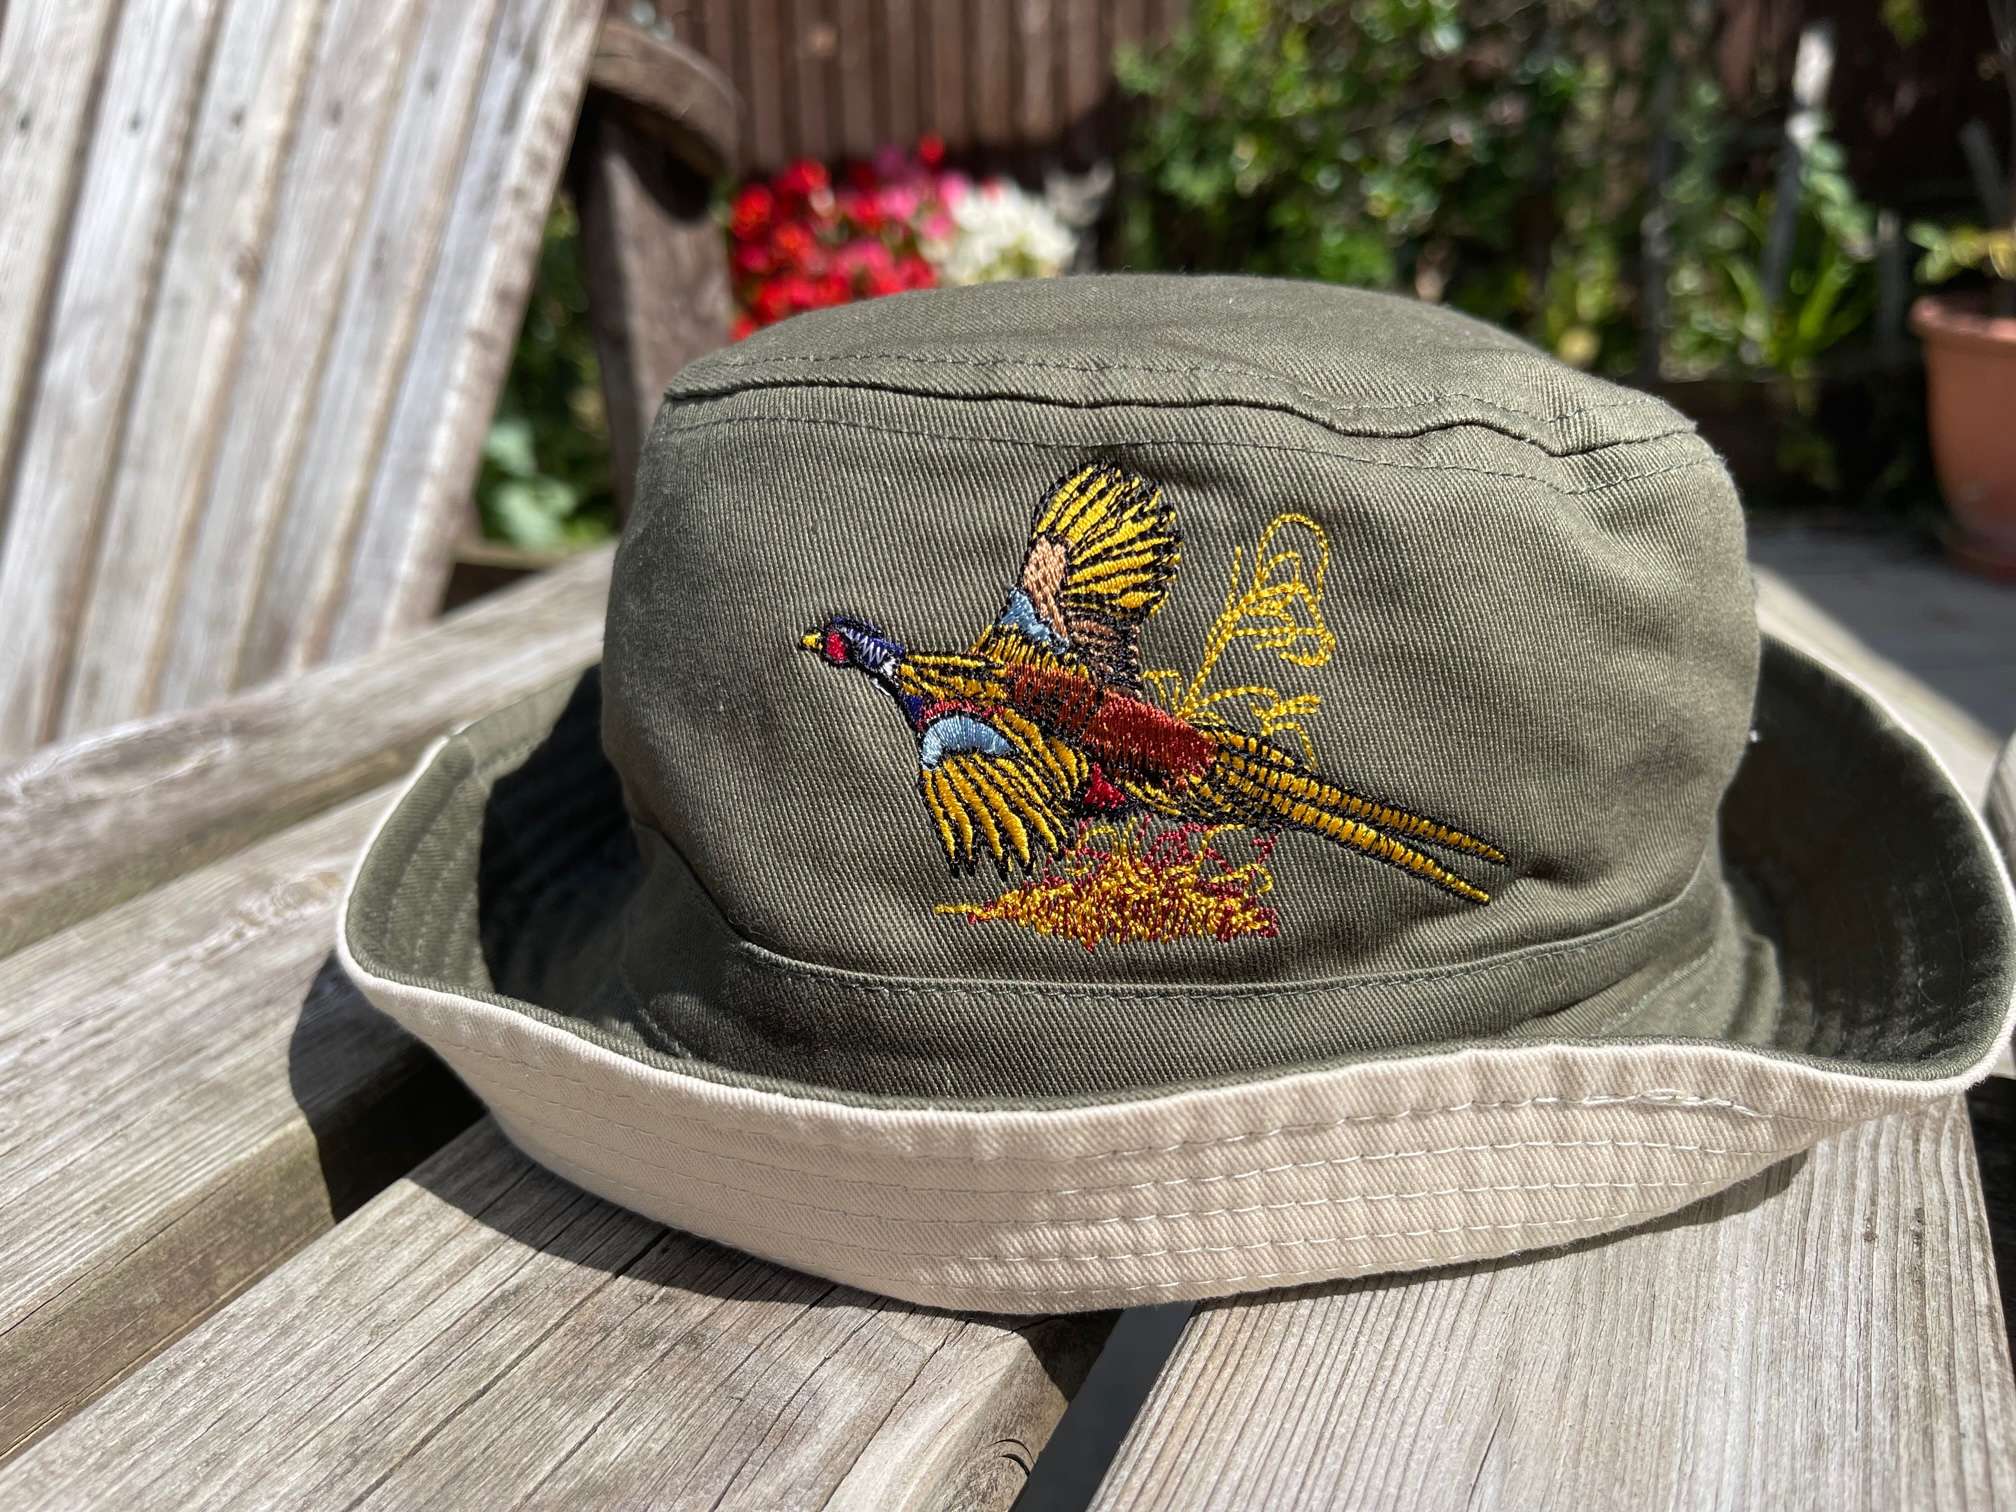 IMG 7214 Bucket Hat with Pheasant embroidery logo. Available in French Navy / White underside, Olive Green / Stone underside & Black / Light Grey Underside 100% Cotton Twill Short brim. Stitched ventilation eyelets. BSCI certified. Reach certified.